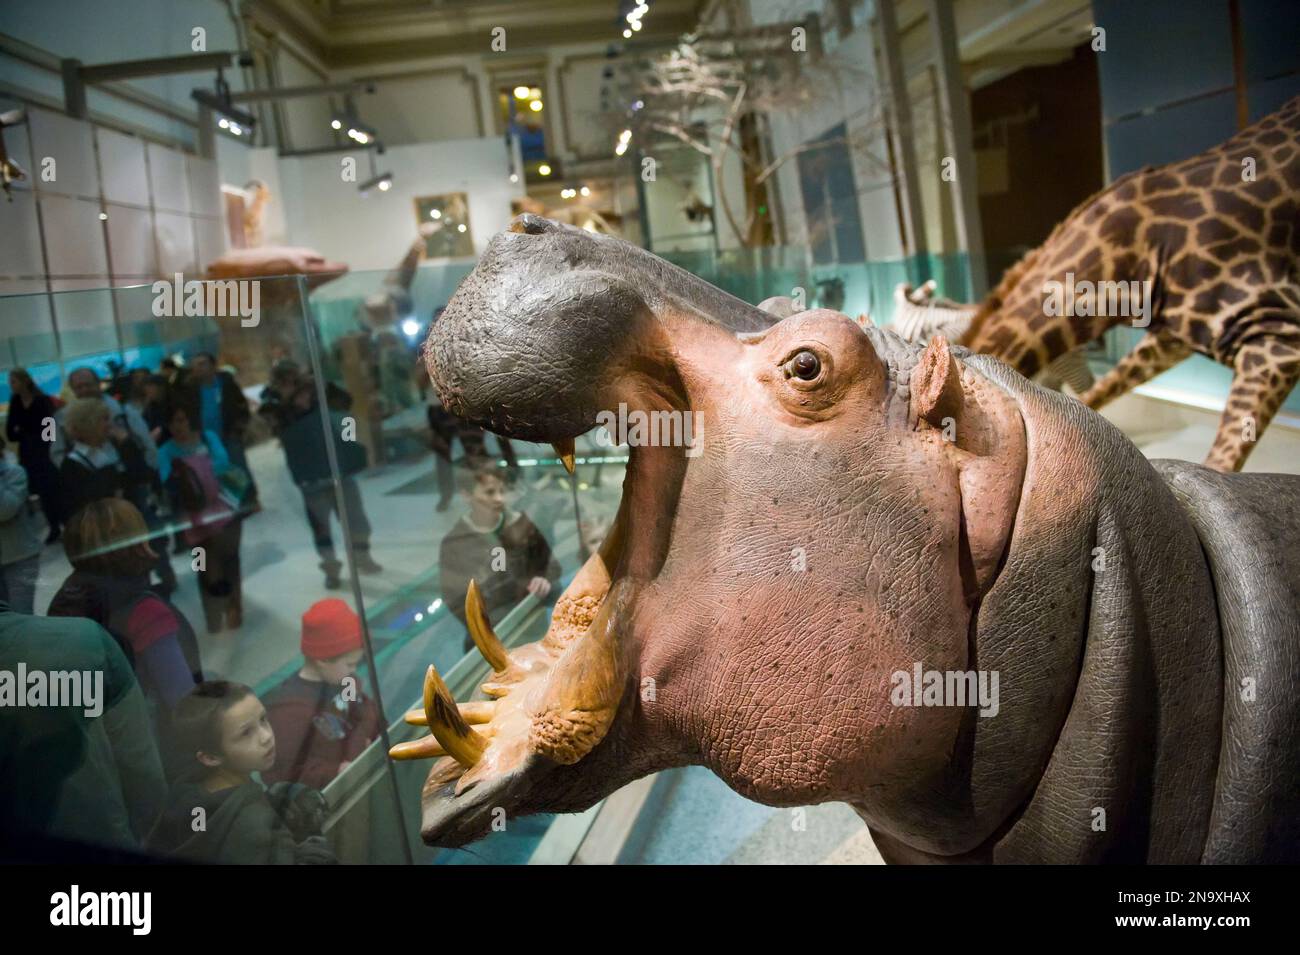 Inside the Smithsonian Museum of Natural History; Washington, District of Columbia, United States of America Stock Photo